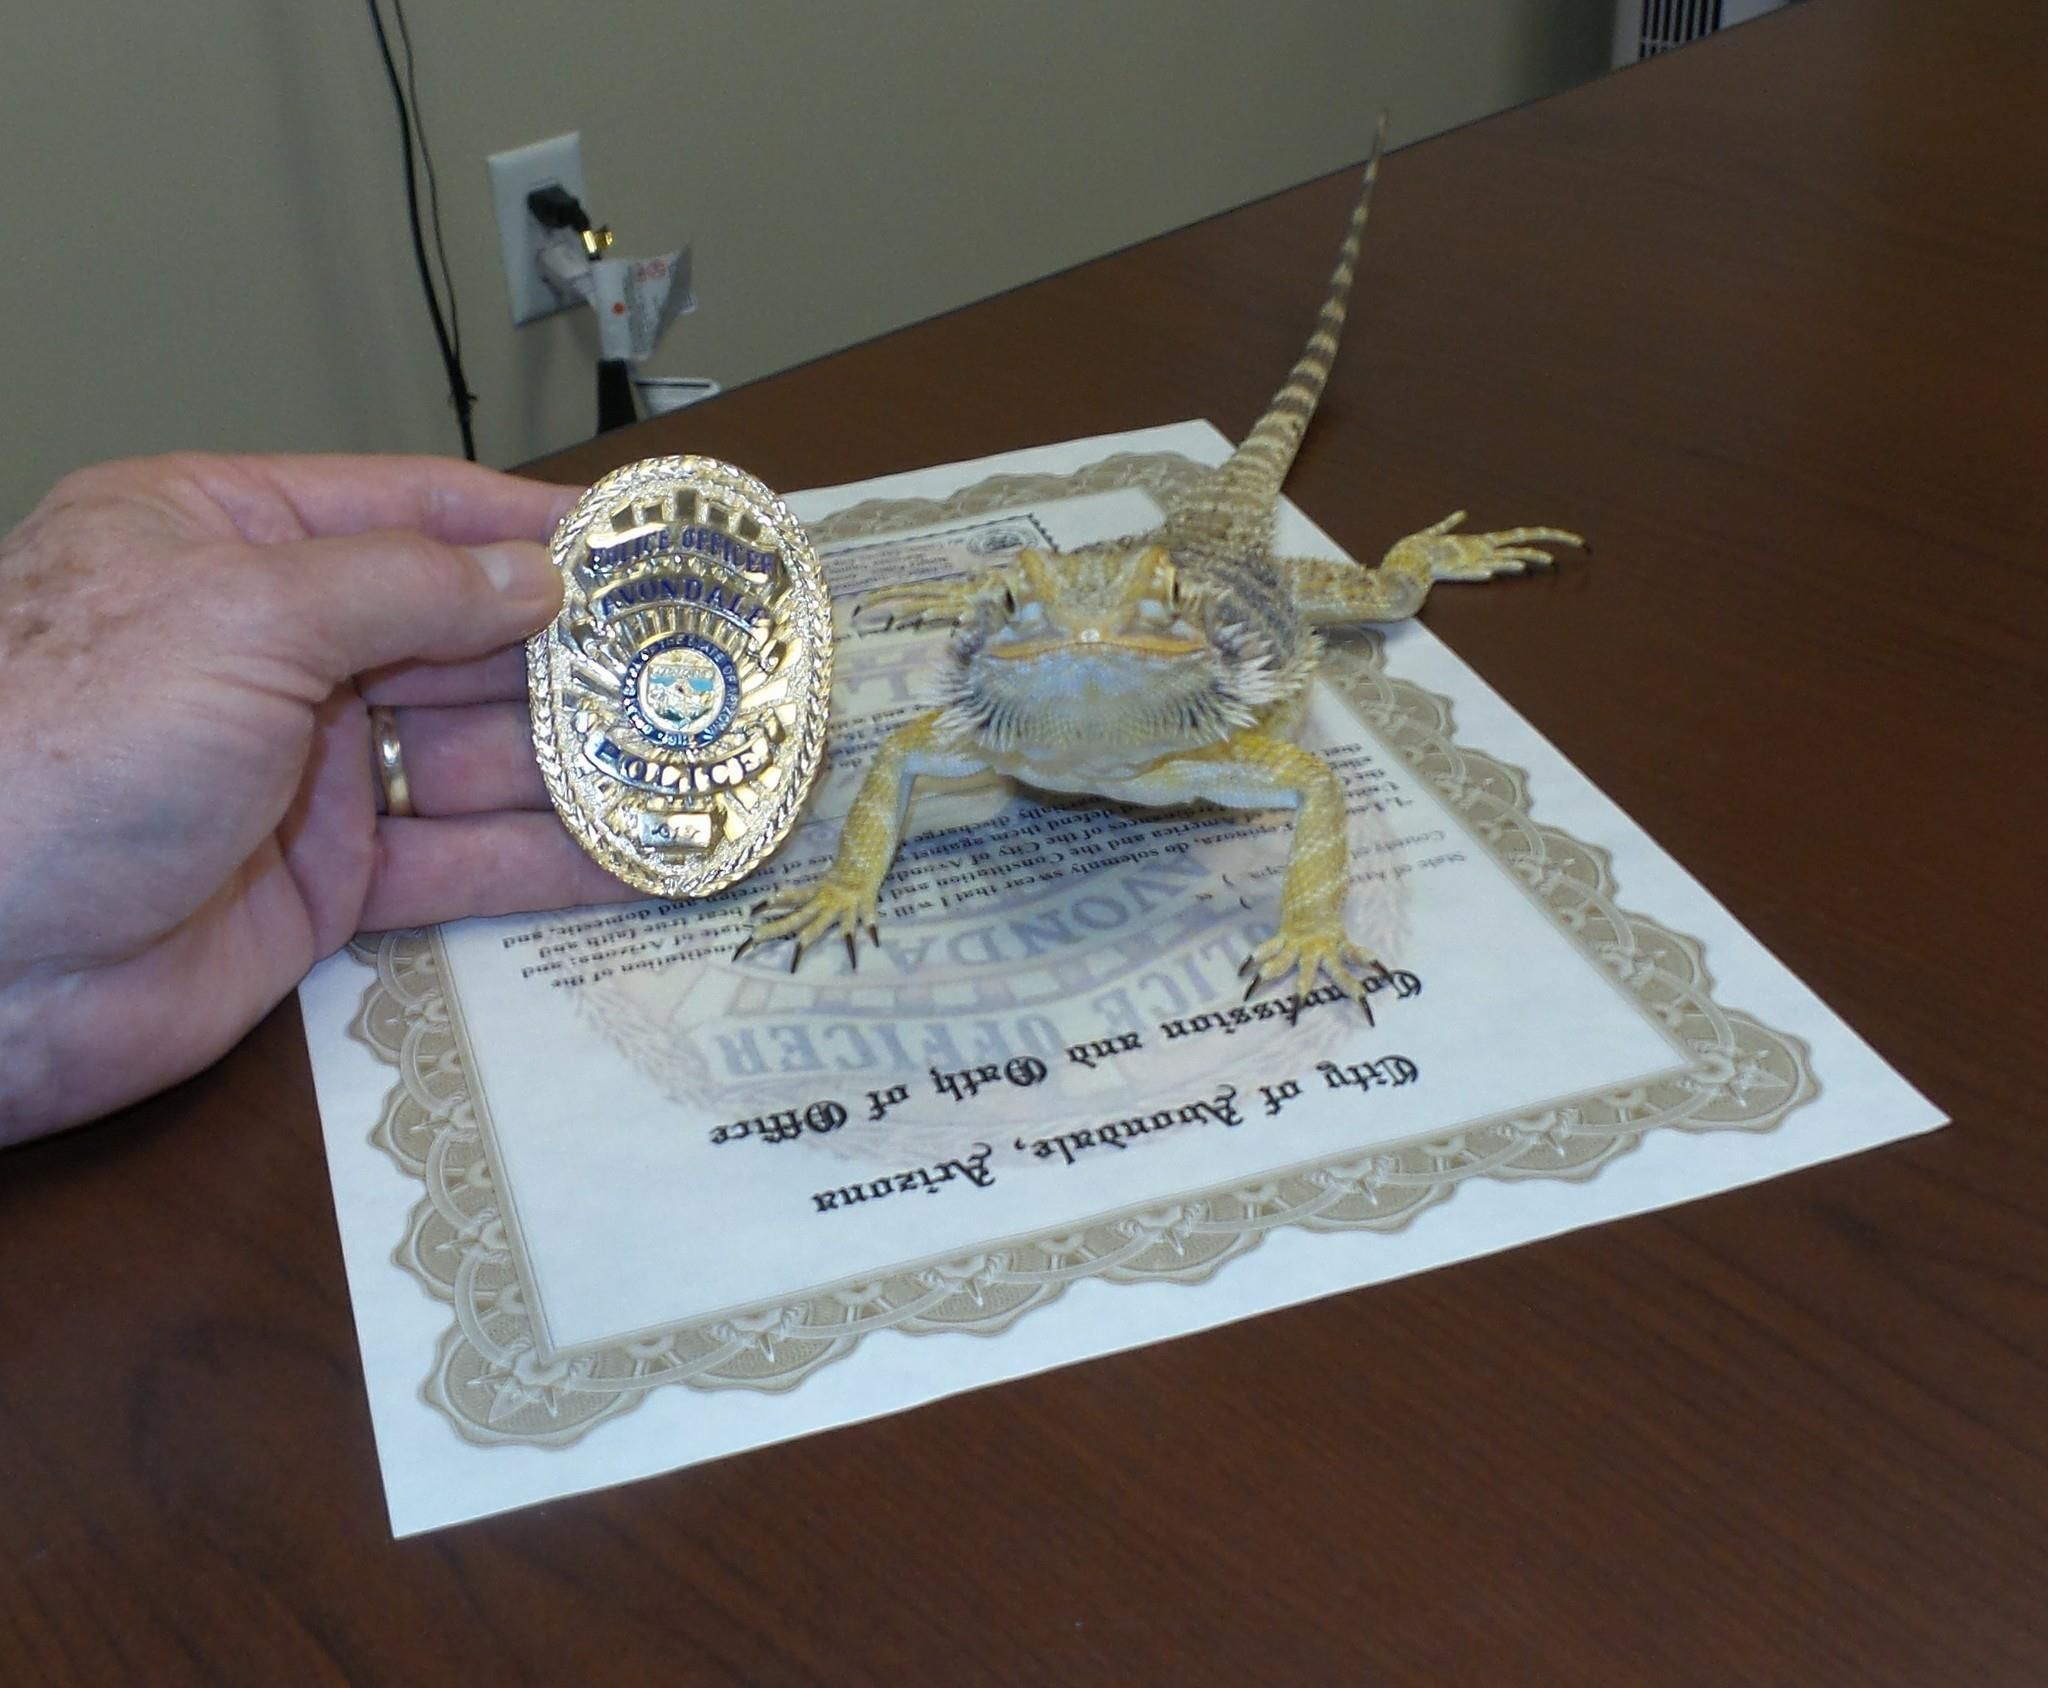 They really made a bearded dragon an official lizard cop.